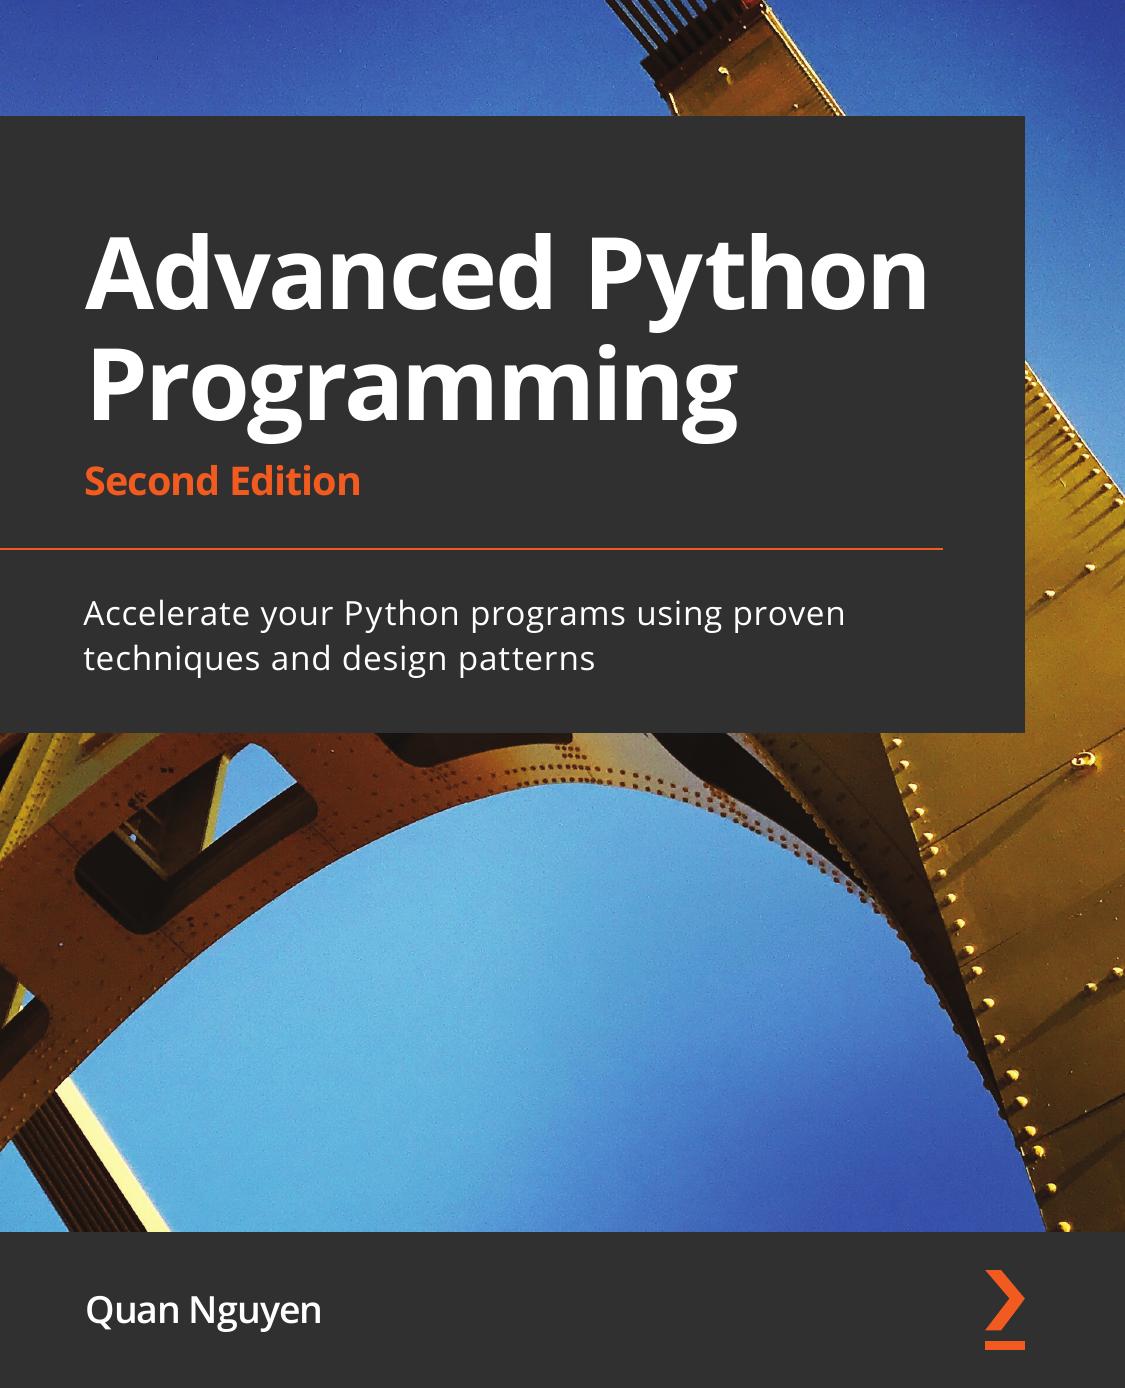 Advanced Python Programming: Accelerate Your Python Programs using Proven Techniques and Design Patterns